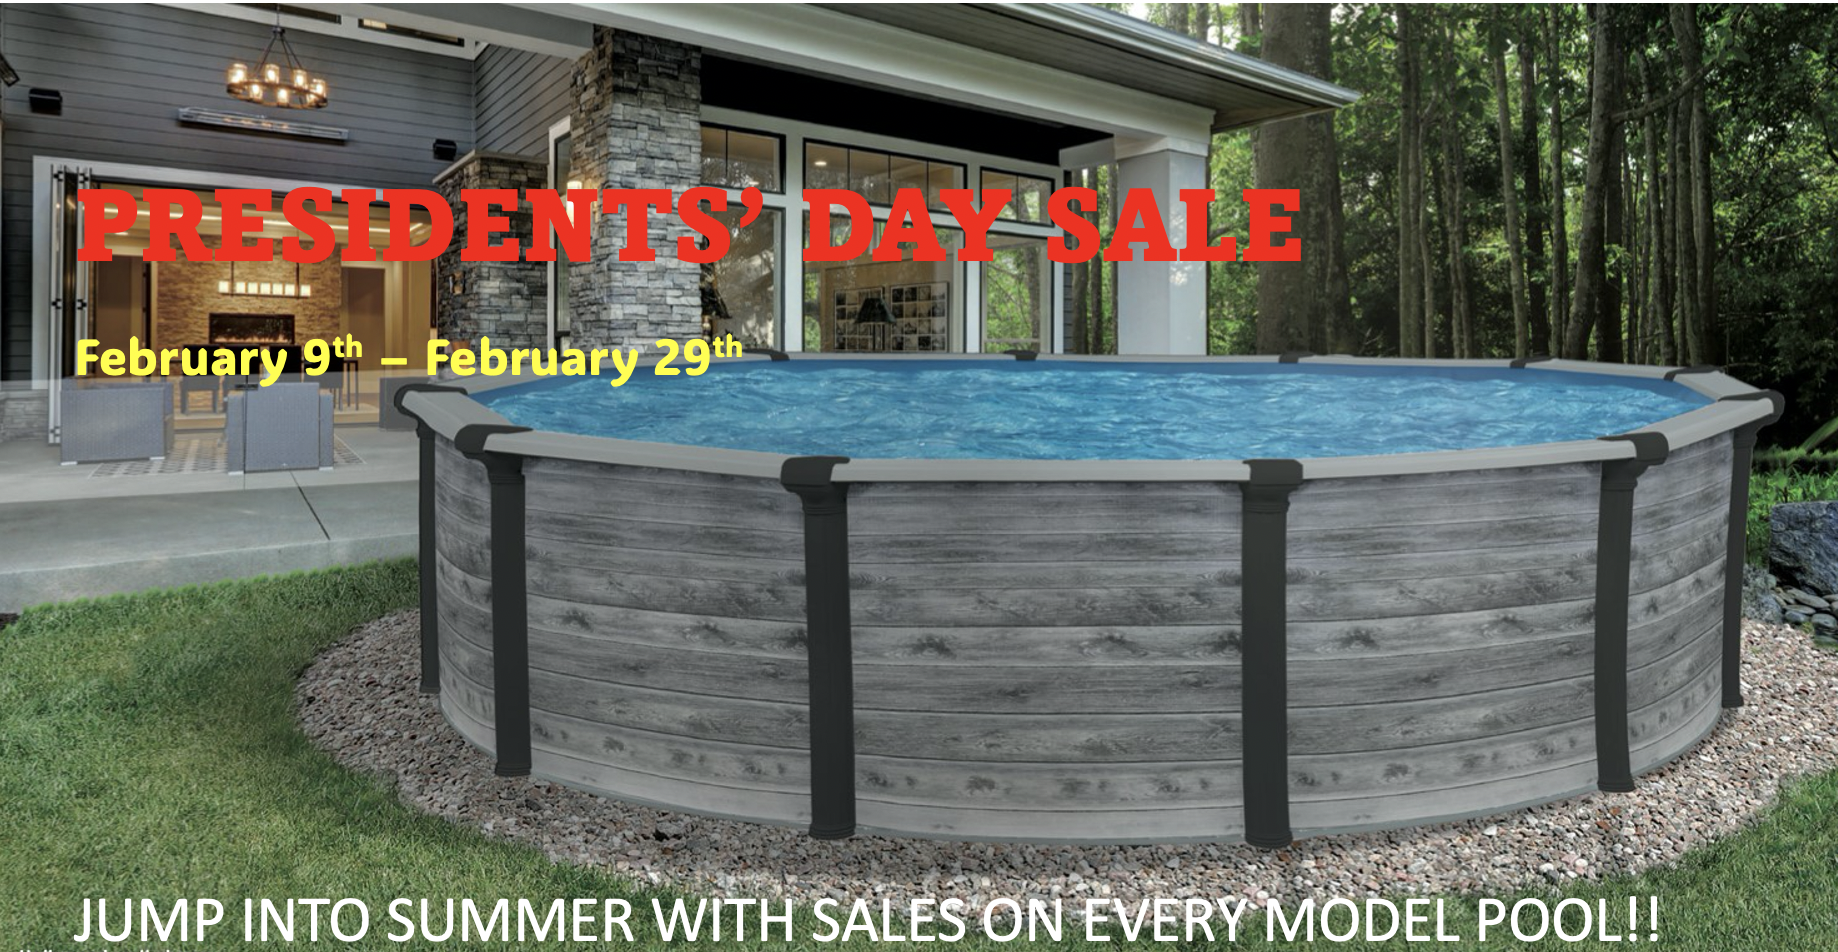 Pool Sale Above Ground Pool Sale Sale Staten Island Pool and Spa New York New Jersey